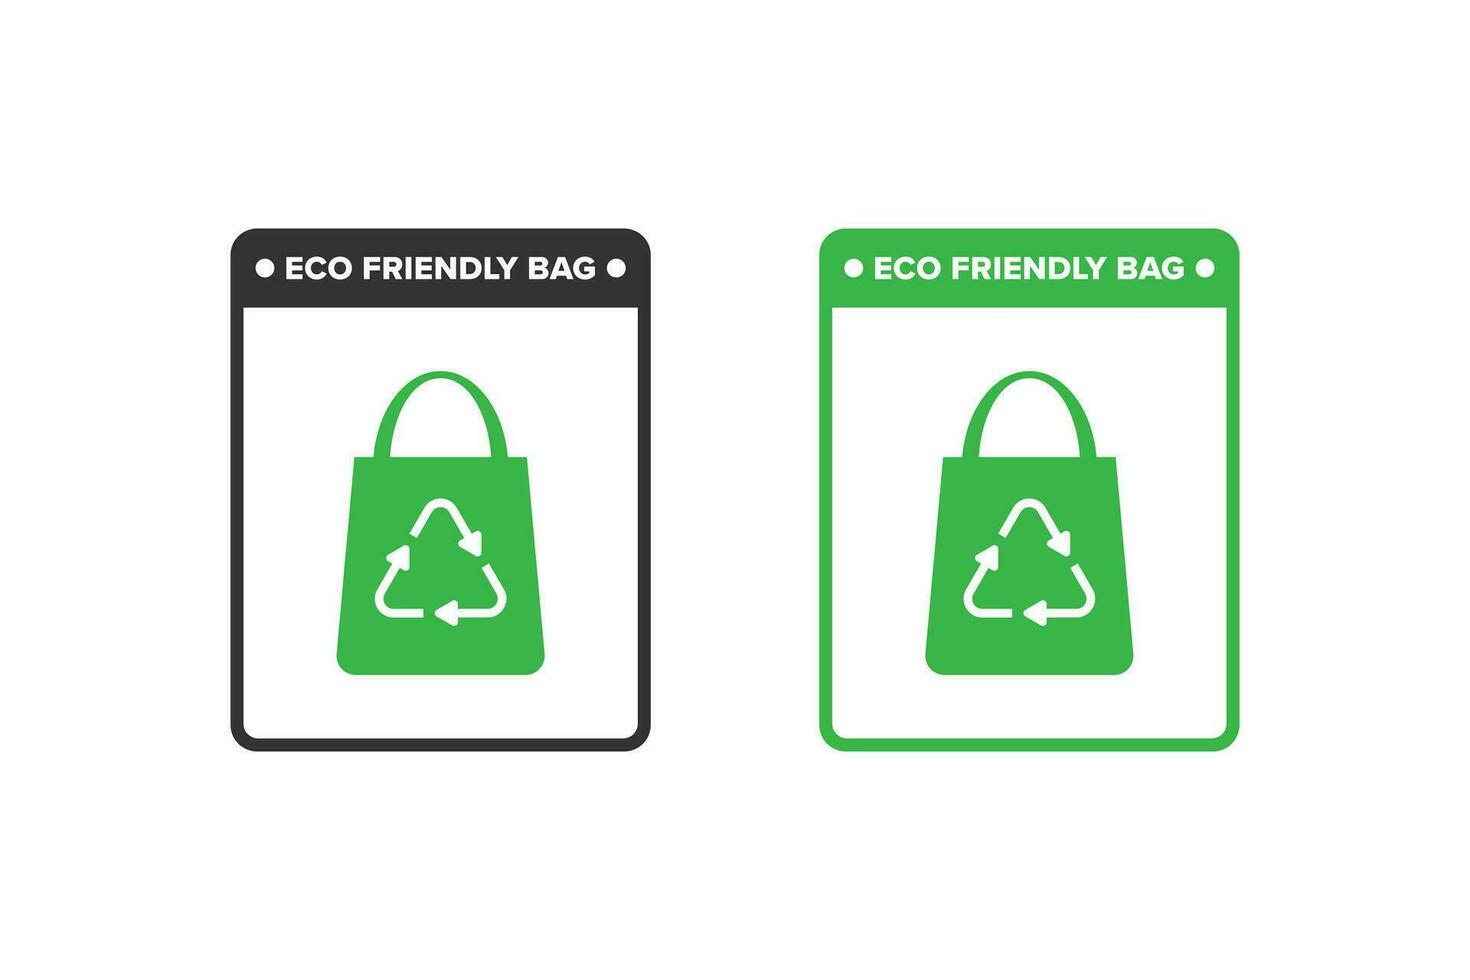 Eco friendly bag icon sign vector design, icon board appeals to use eco friendly bags